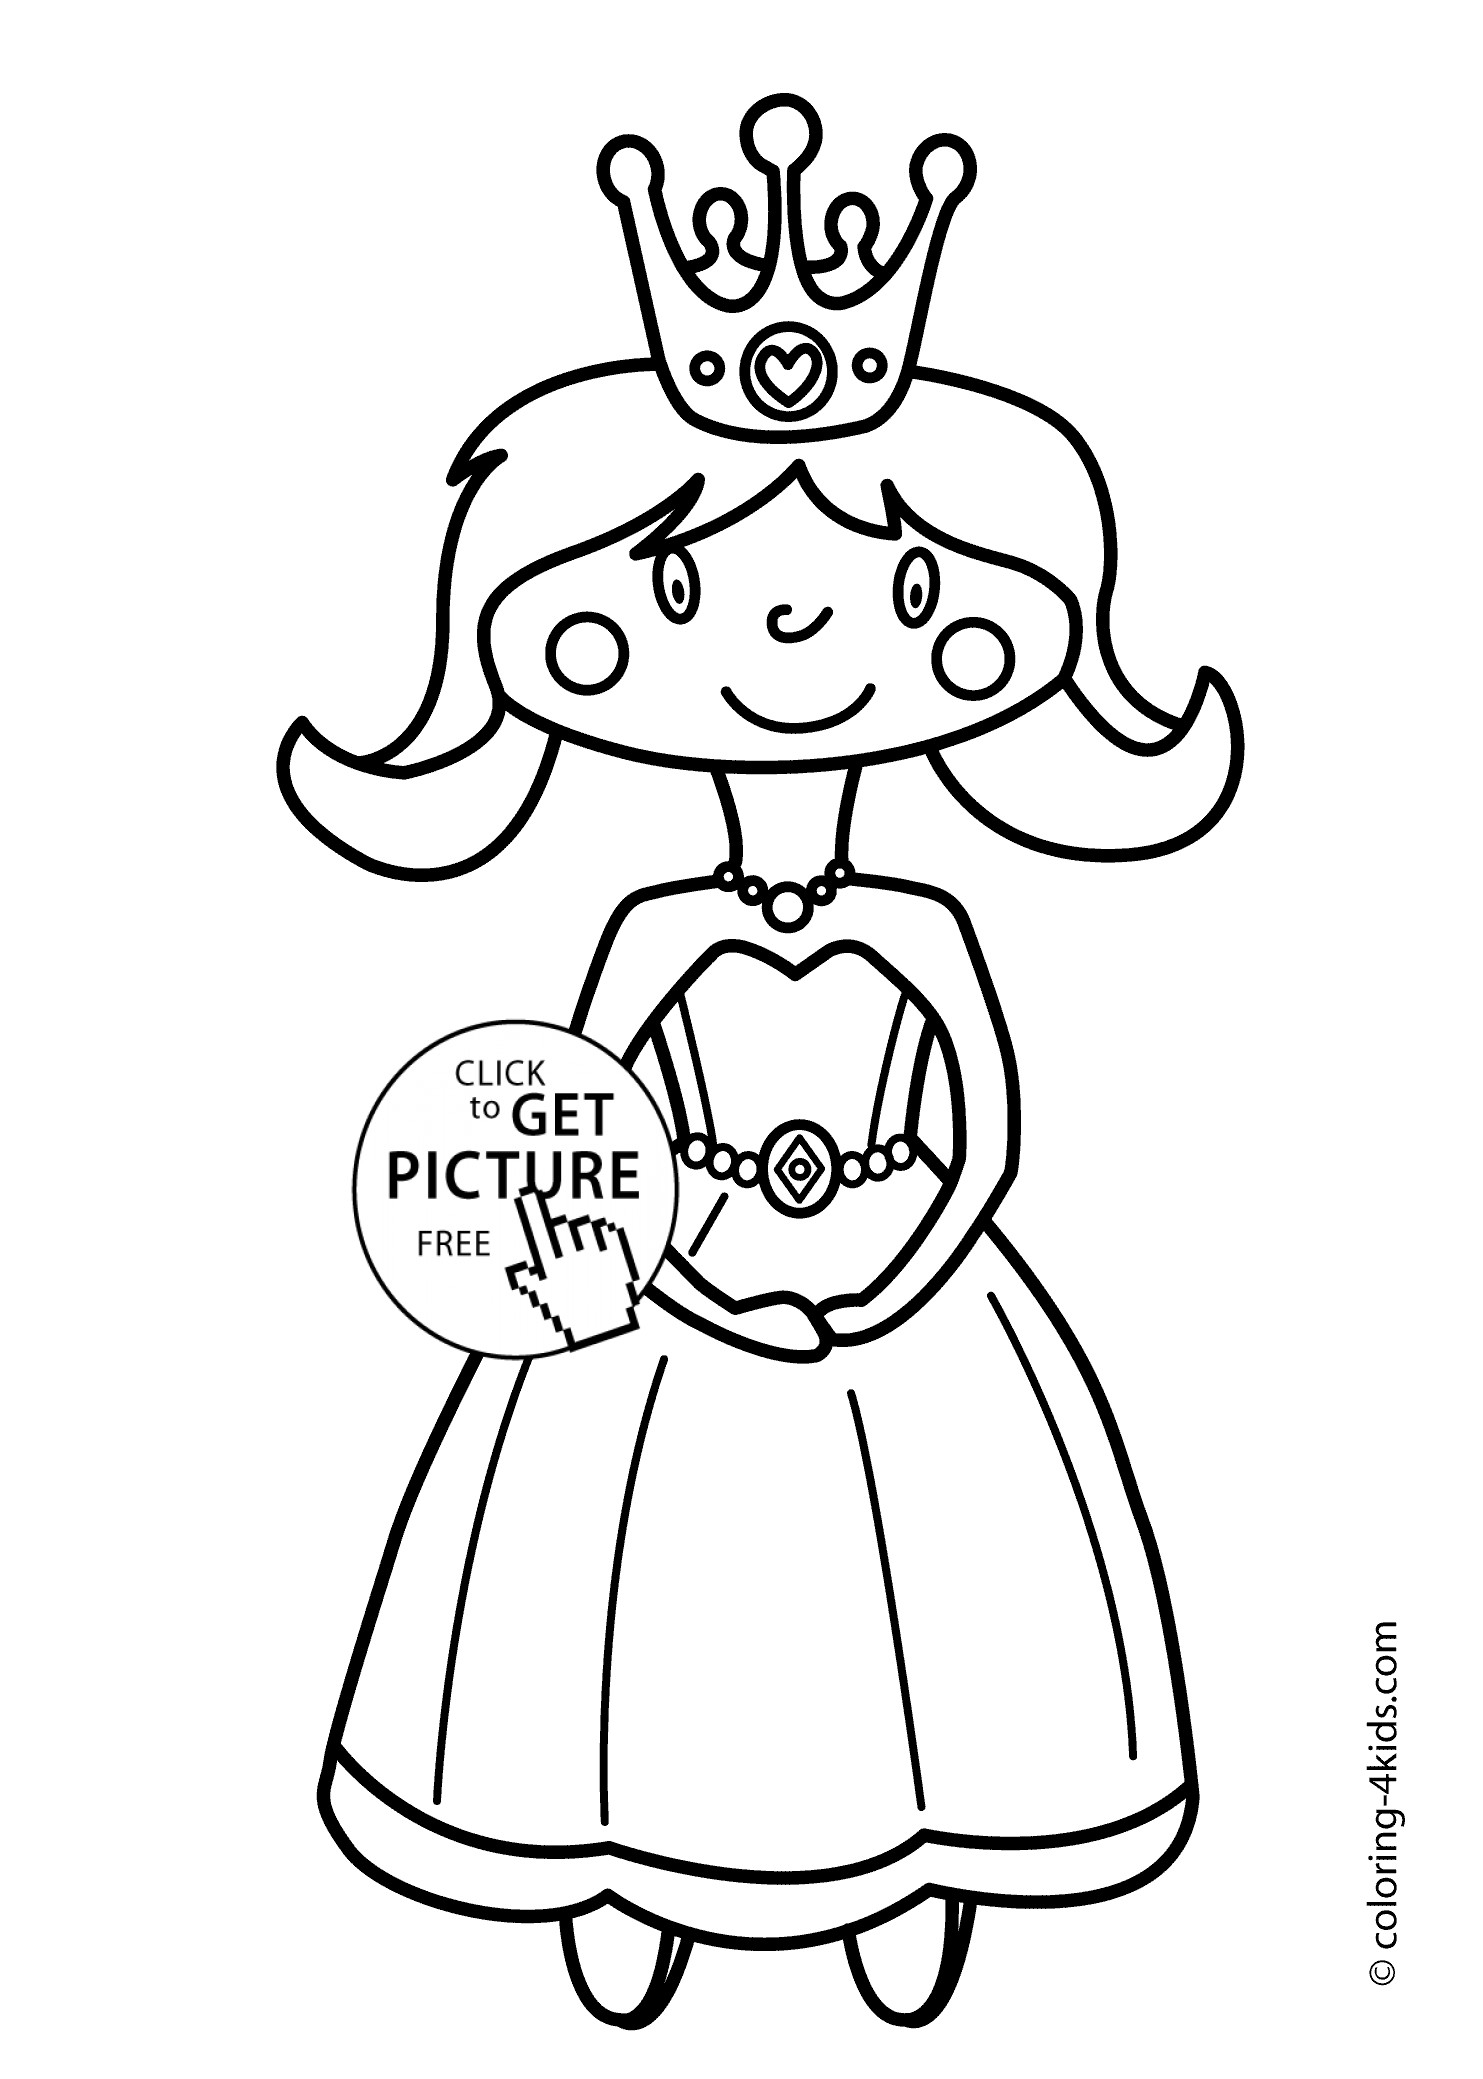 Online Printable Coloring Pages For Girls
 Cute Princesse Coloring pages for girls printable